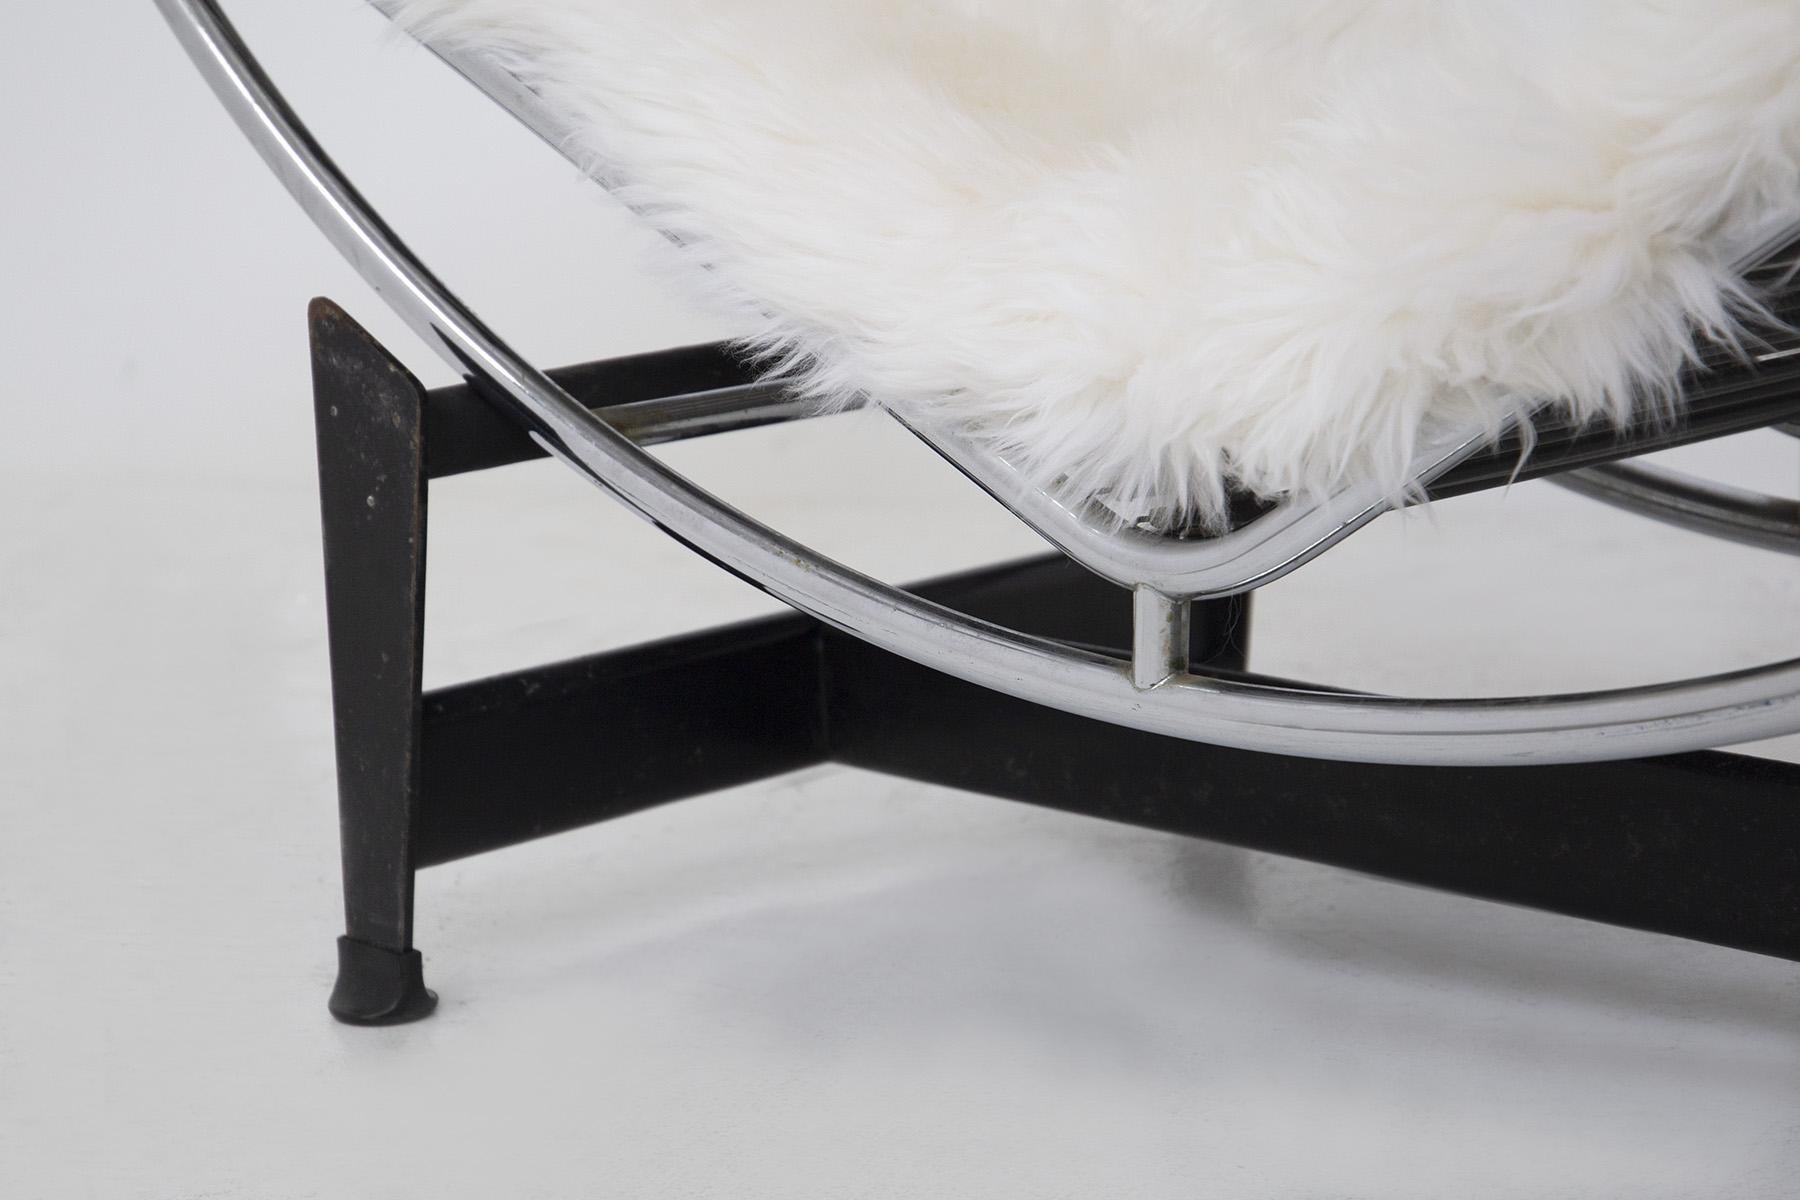 Steel Le Corbusier Chaise Longue in Fur LC4, C. Perriand, P. Jeanneret for Cassina